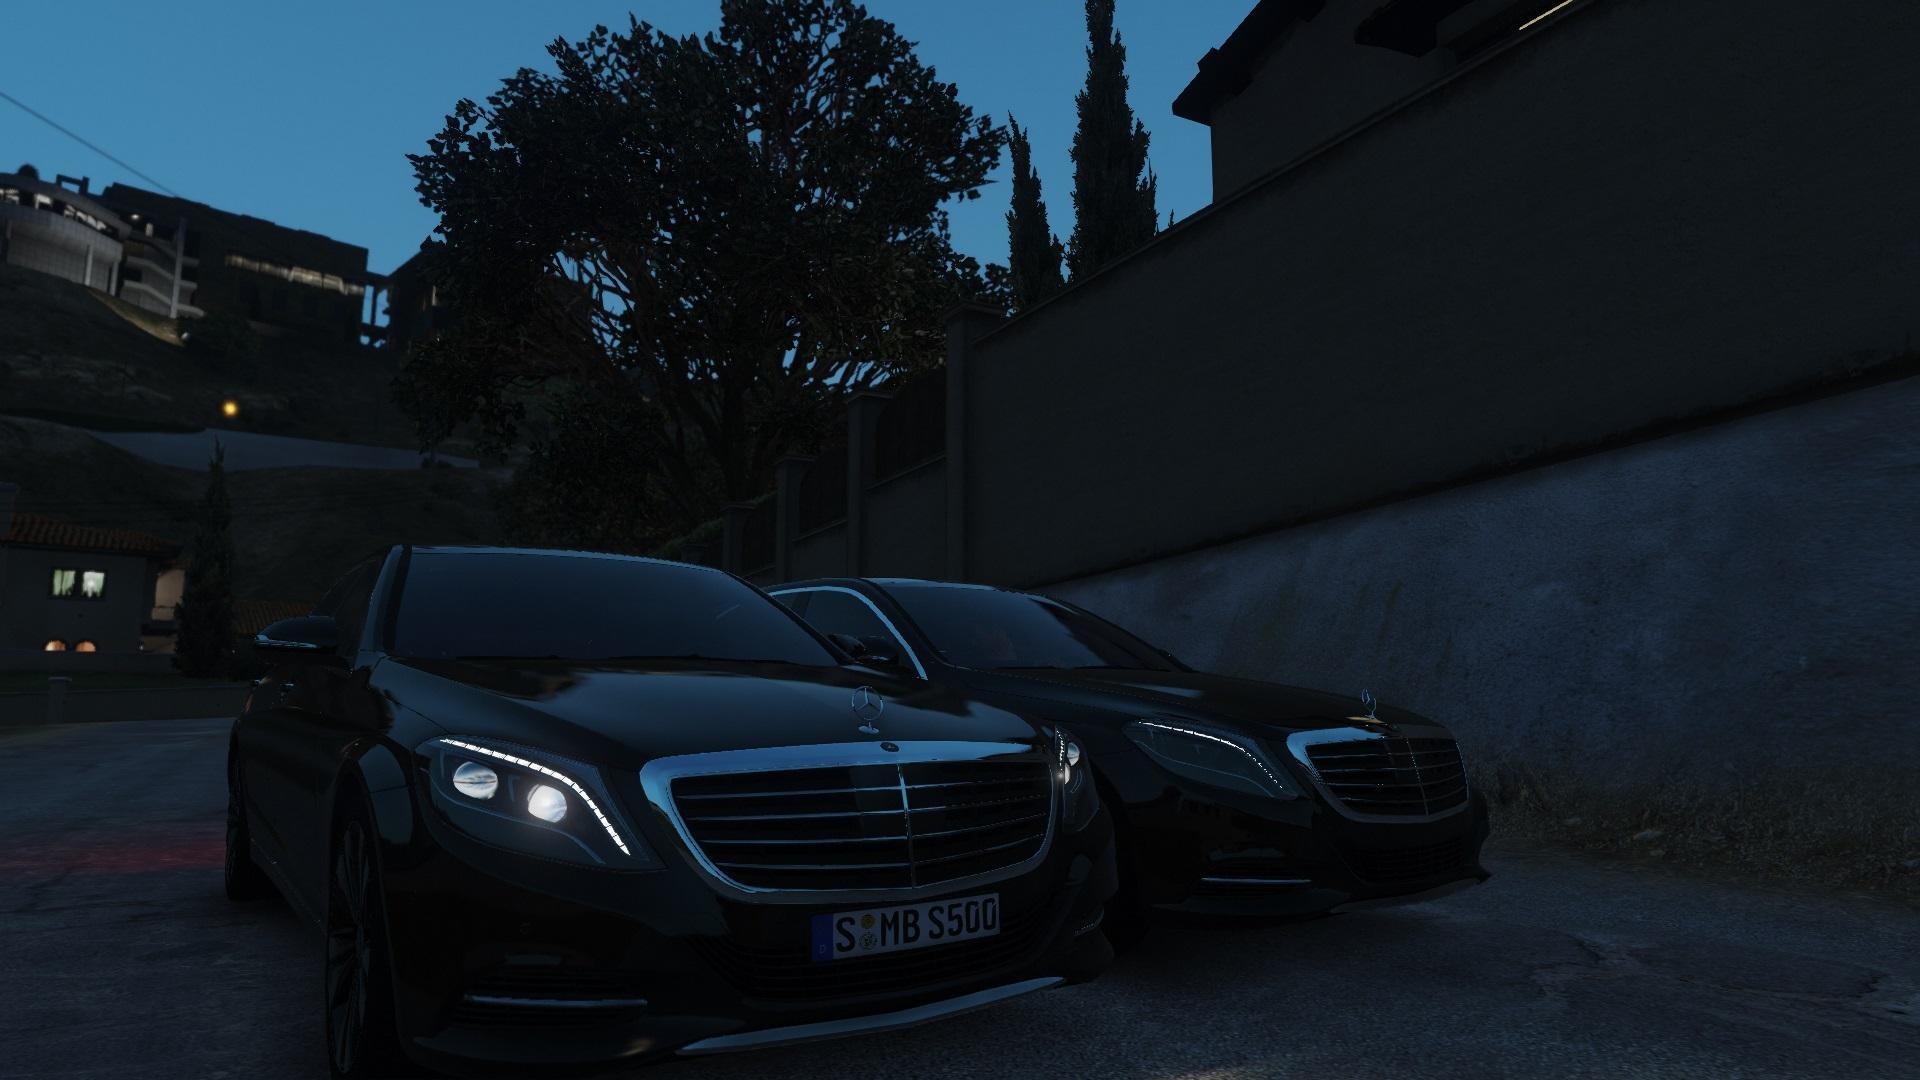 XPERIA's 2014 Mercedes-Benz S500 for GTAV 1.41 and the future version